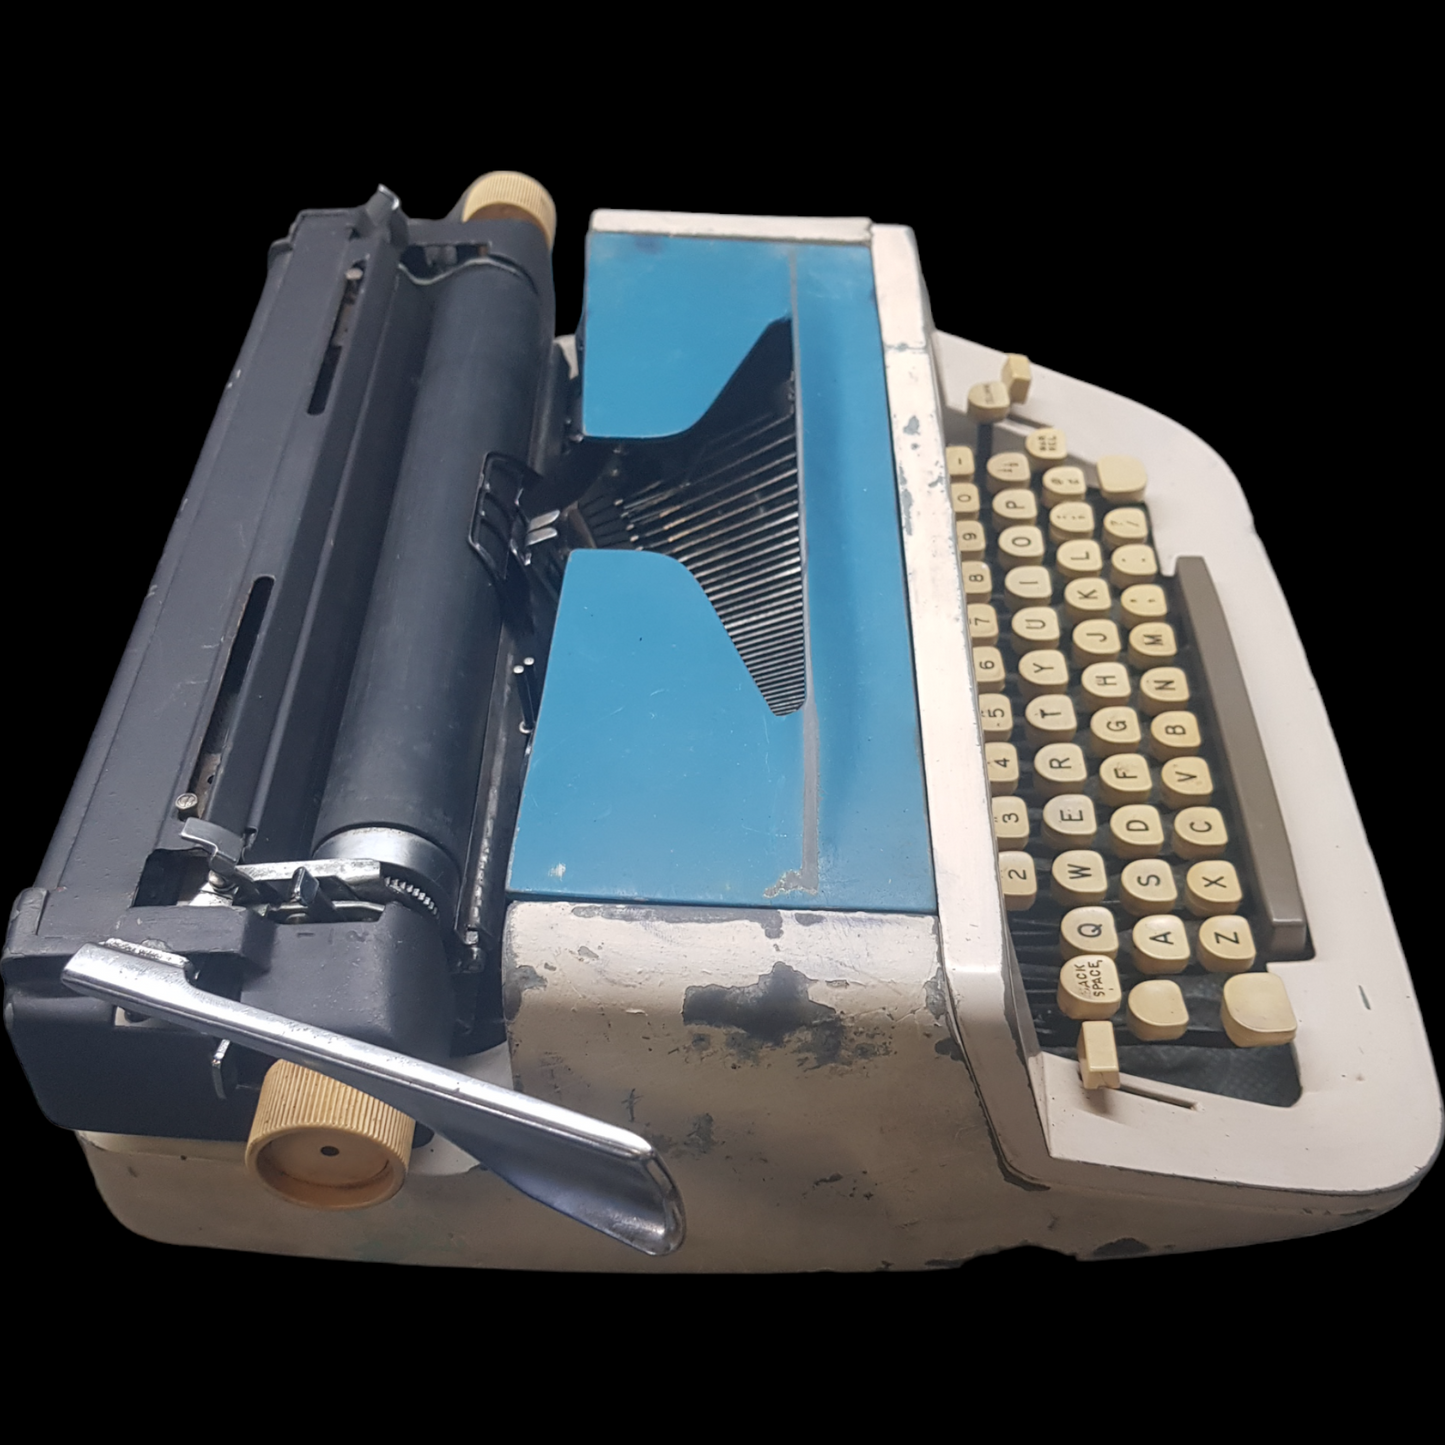 Image of Royal Safari Typewriter. A mid Size Rare Portable Typewriter. Made in the USA. Available from Universal Typewriter Company.